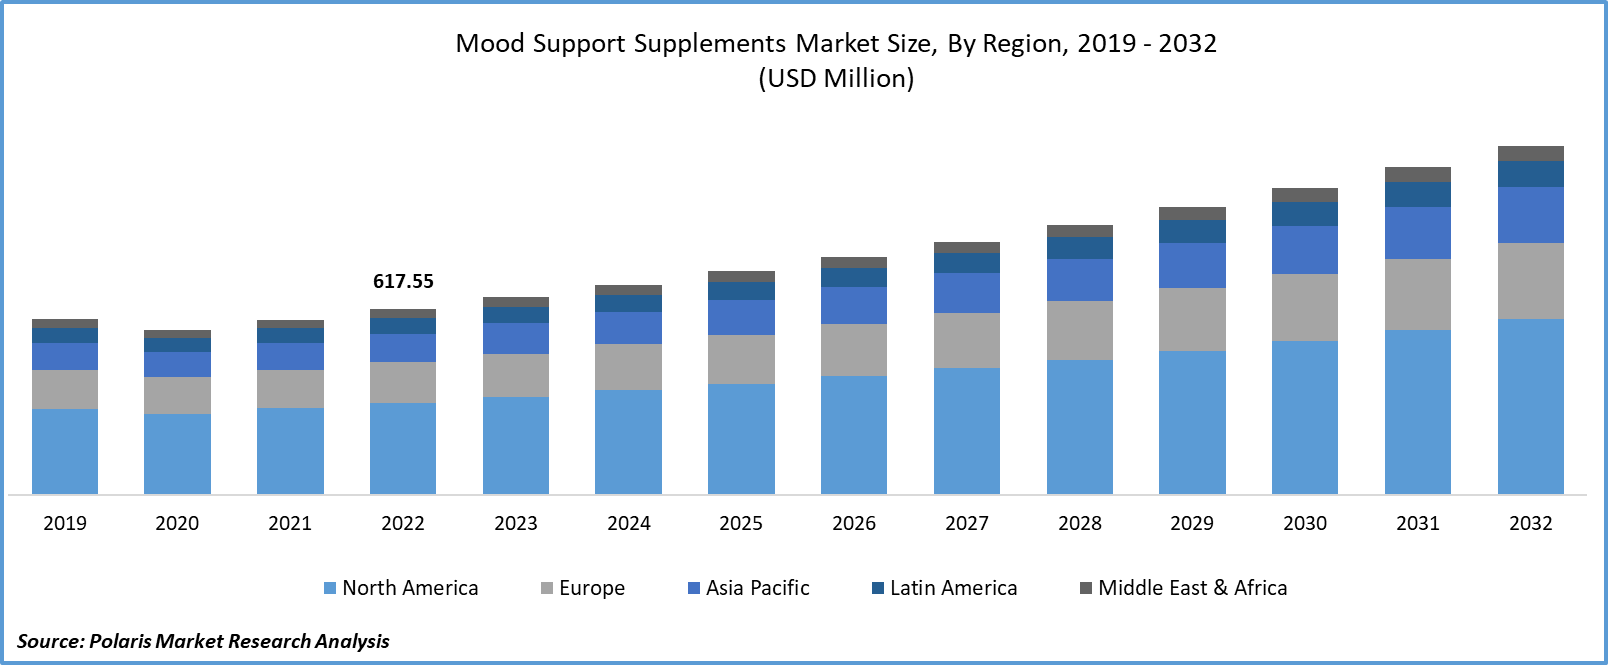 Mood Support Supplements Market Size